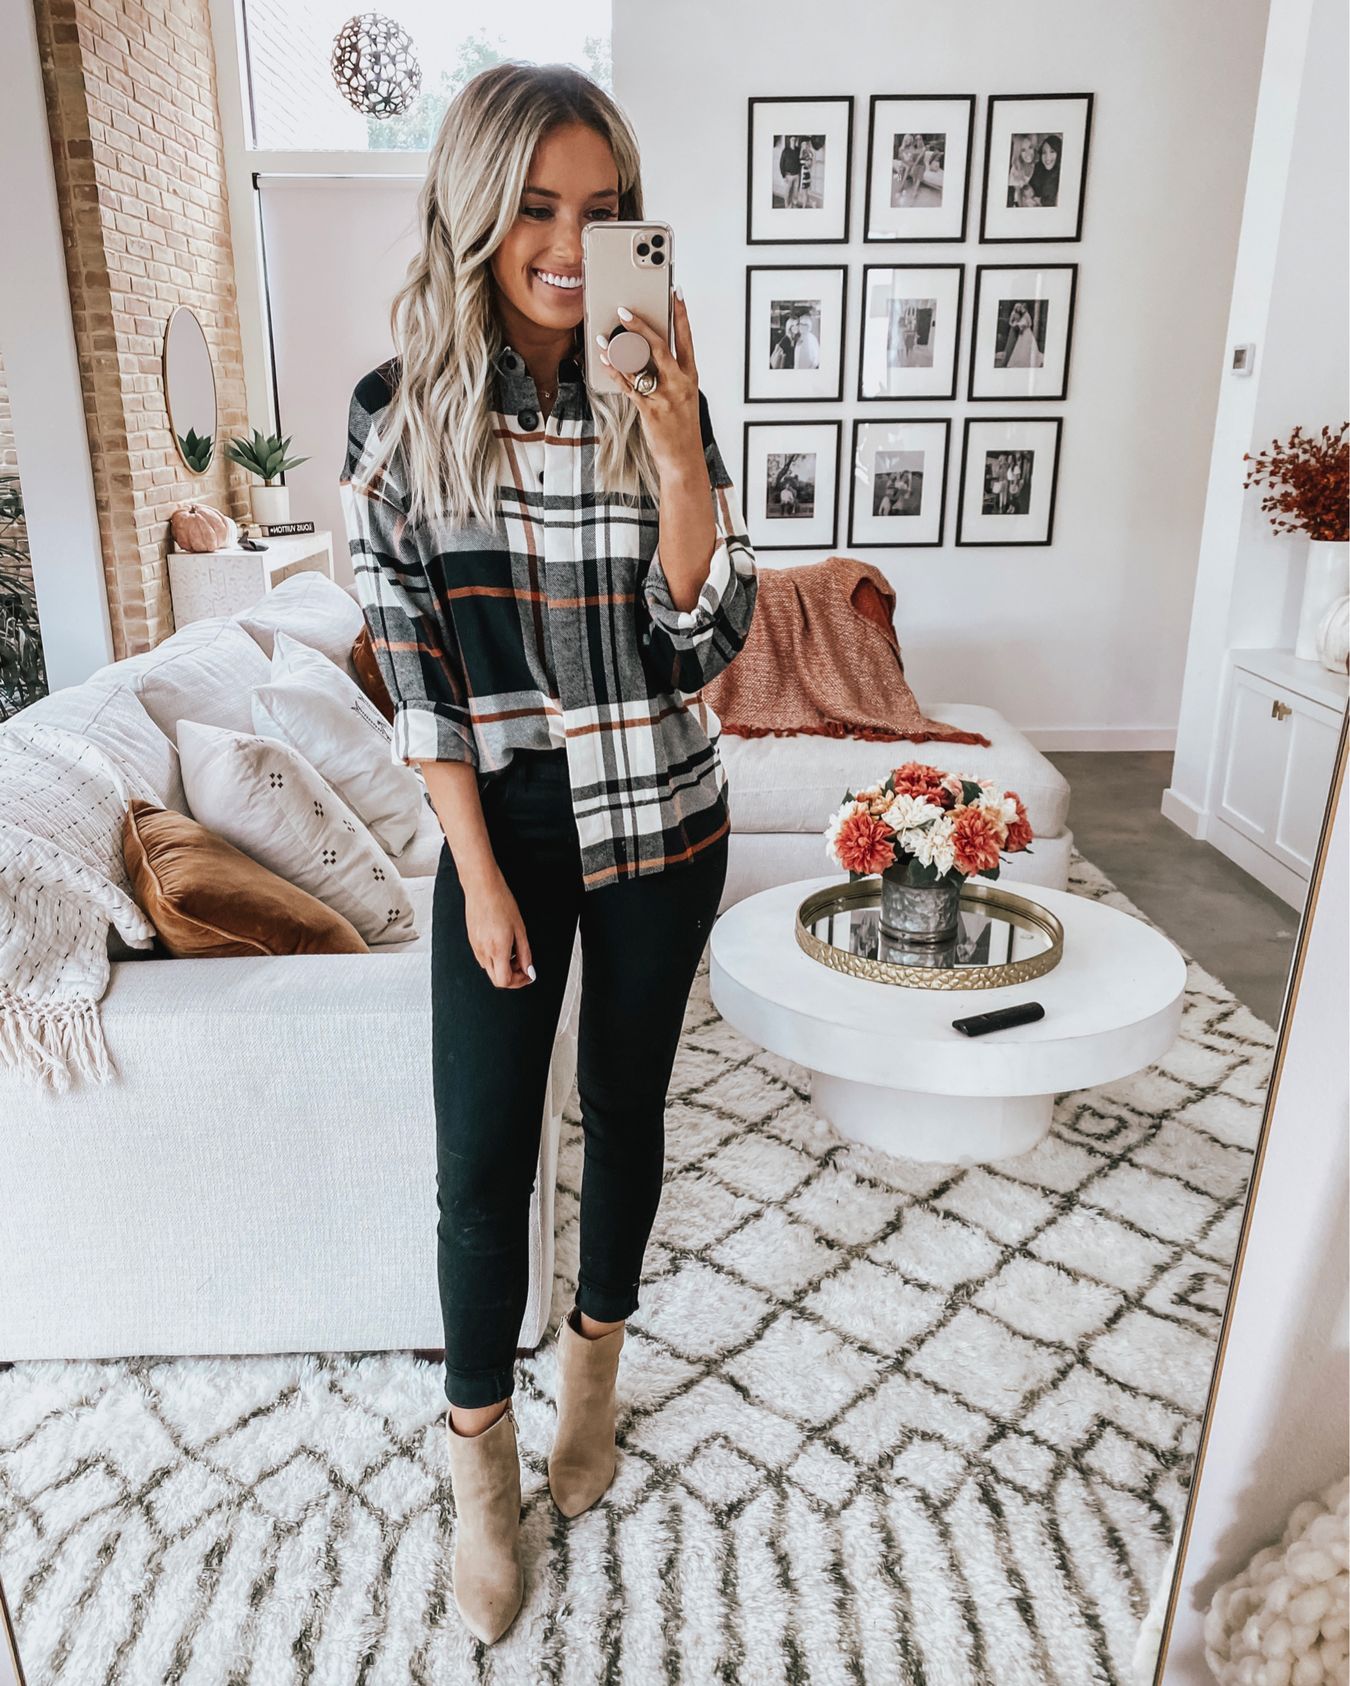 From Day to Night: Flawless Flannel Shirt
Outfits